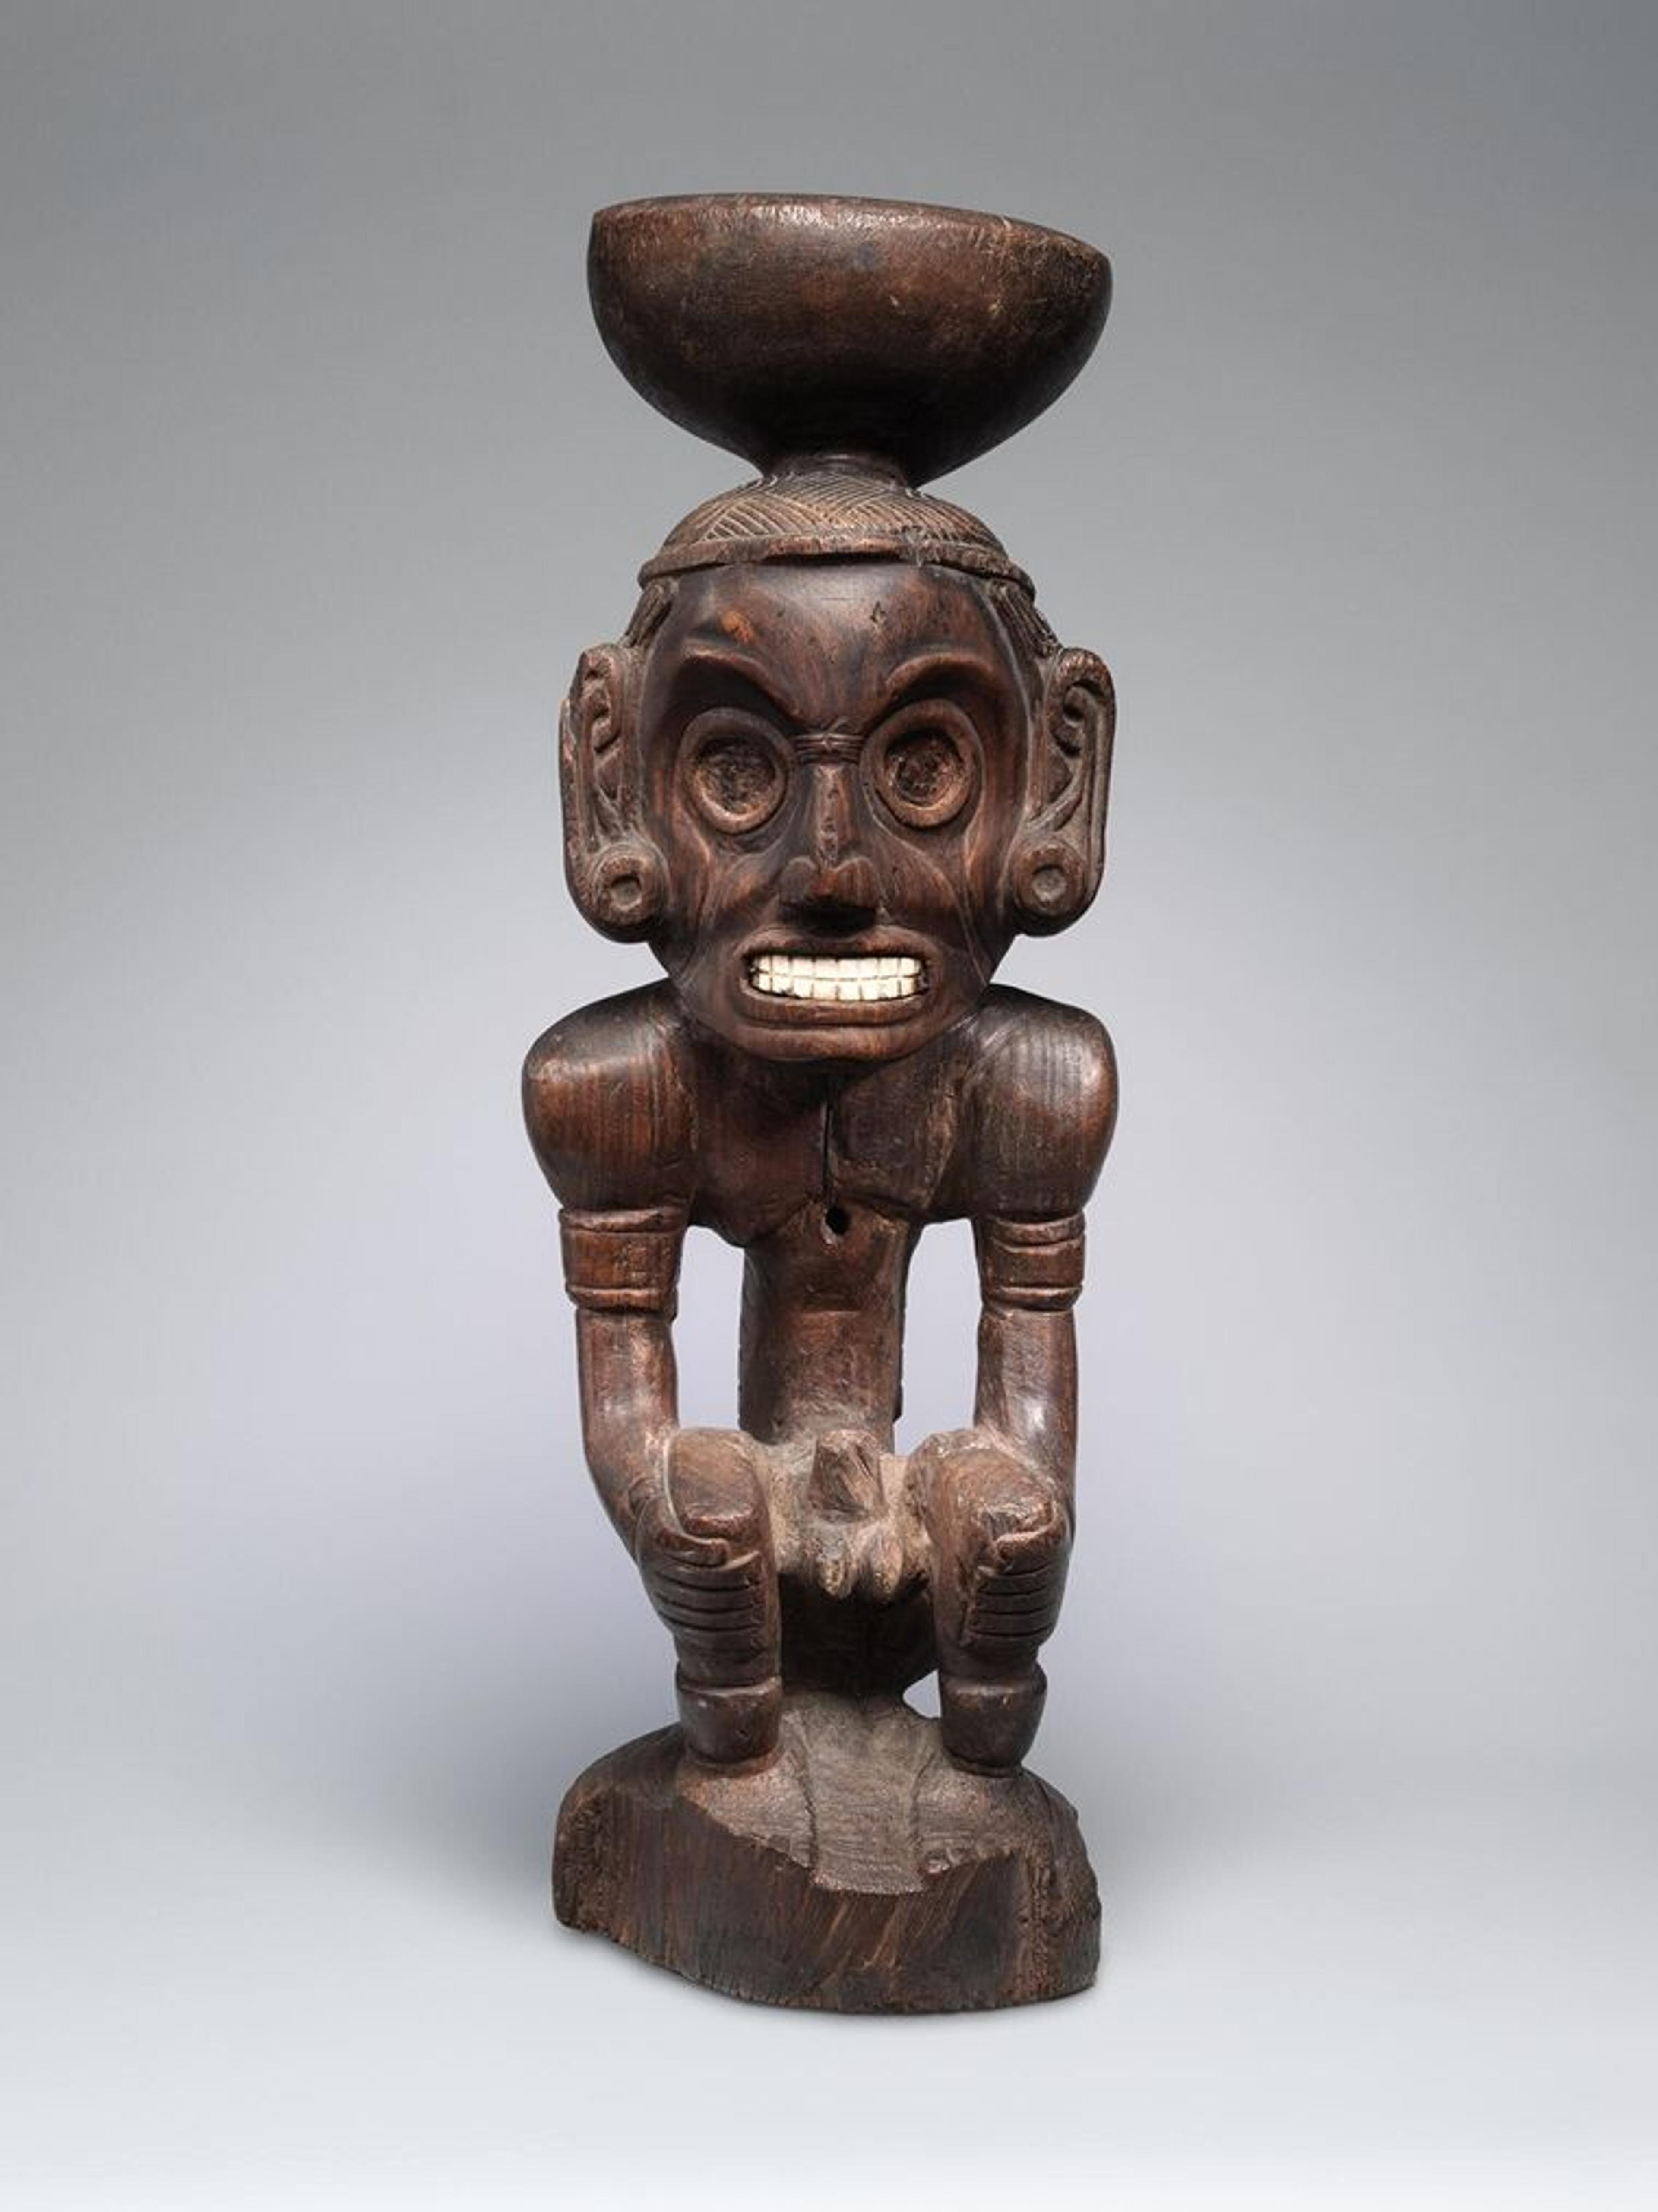 A wooden sculpture of a figure with a stand on its head